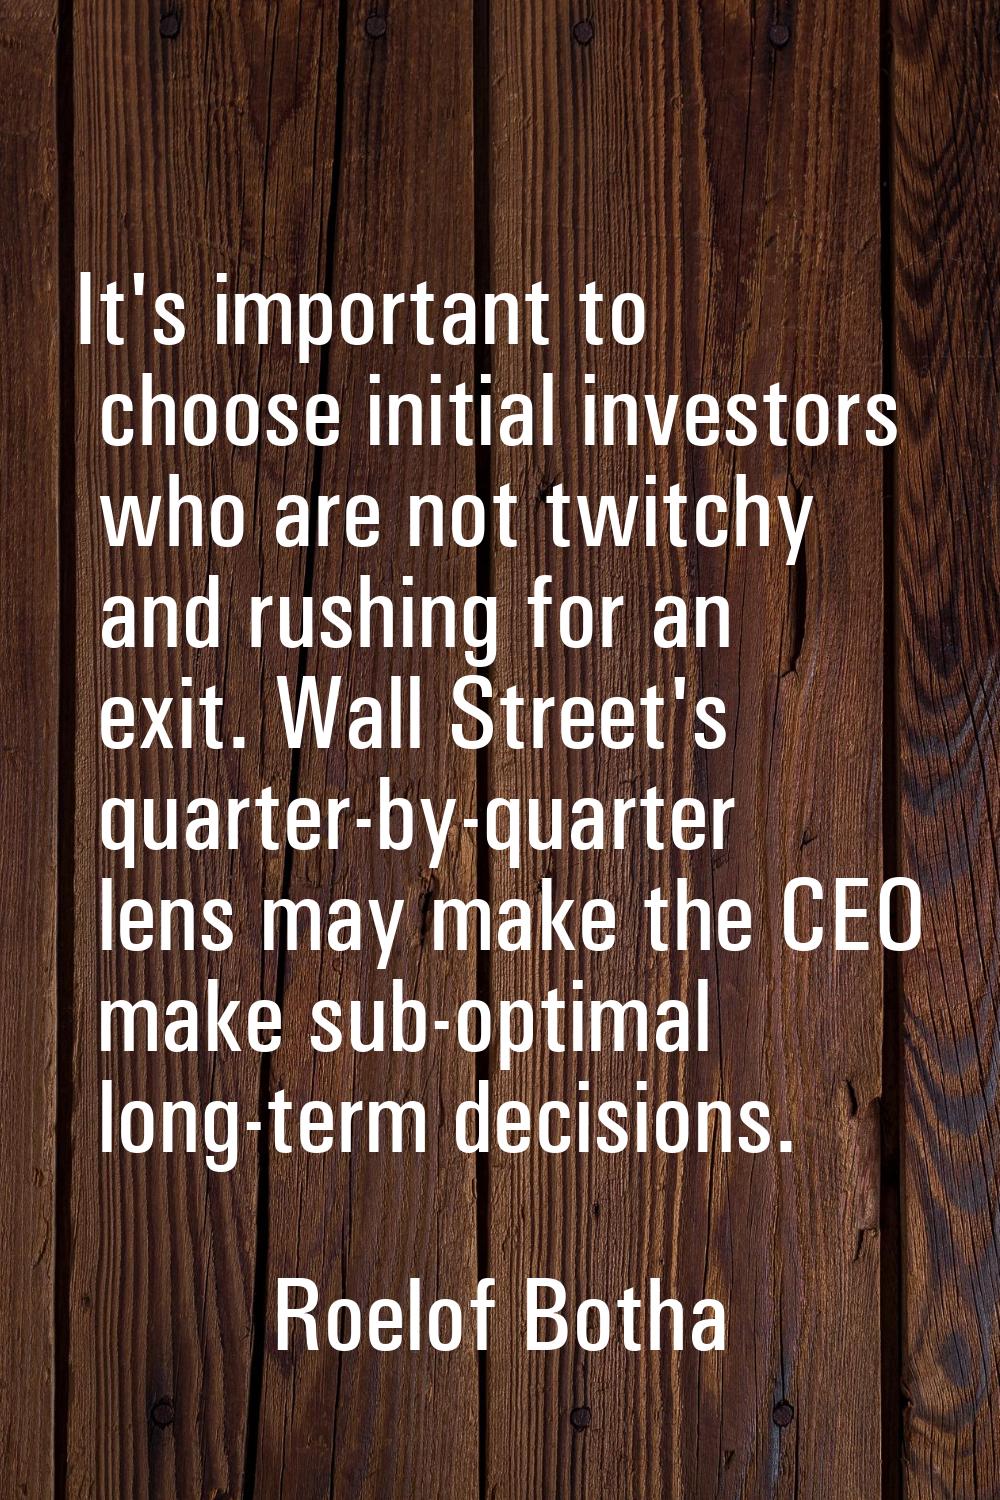 It's important to choose initial investors who are not twitchy and rushing for an exit. Wall Street